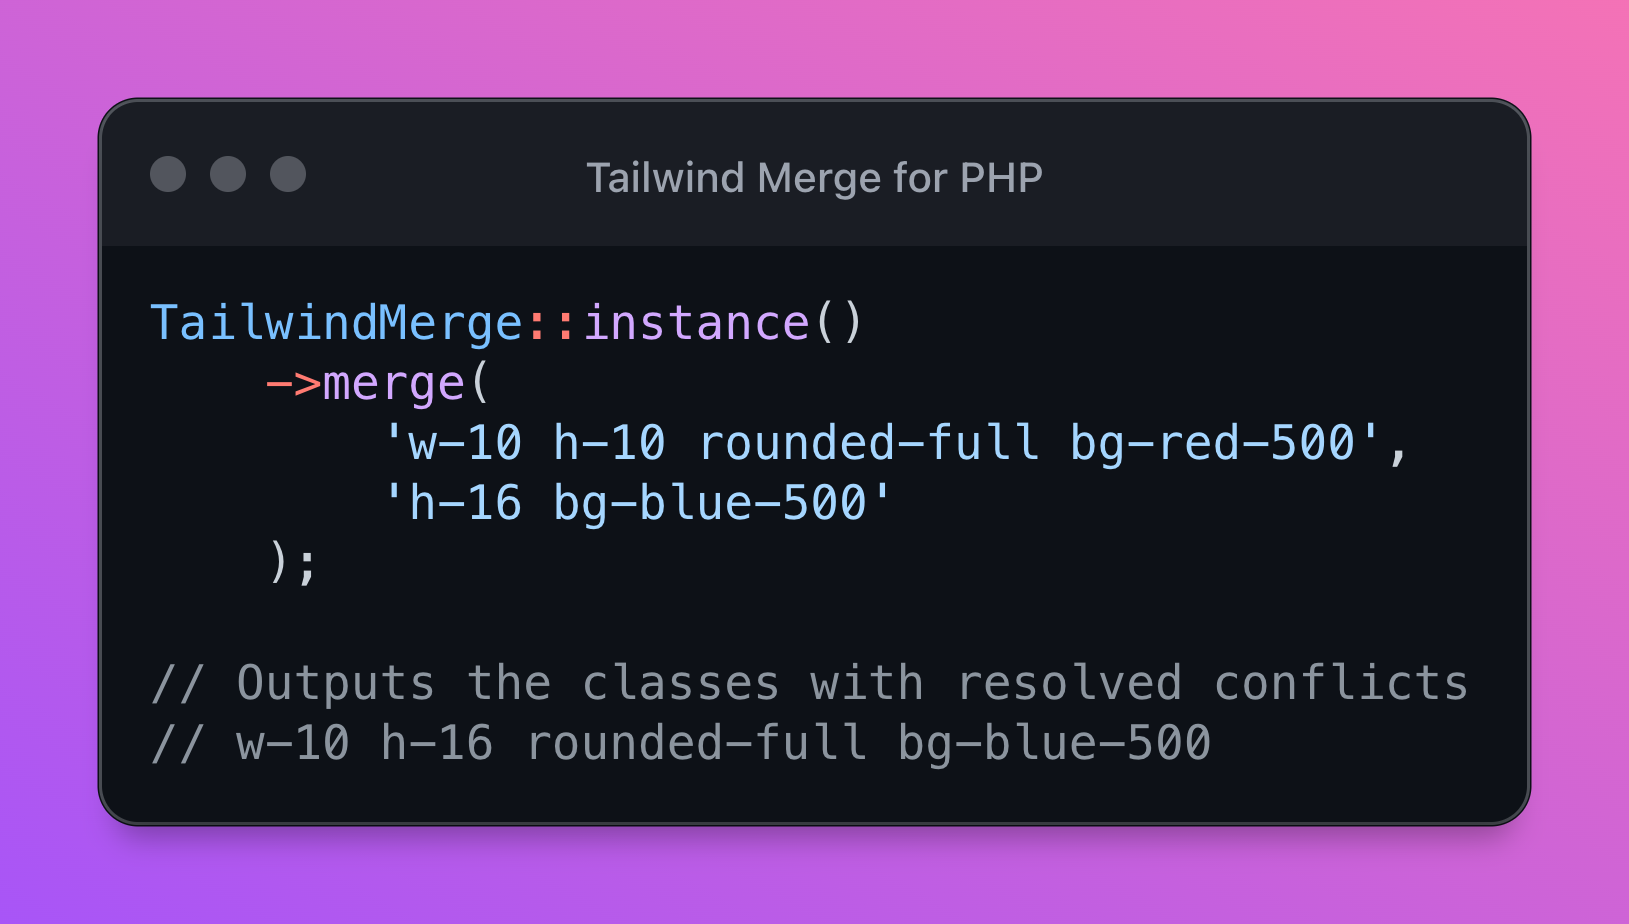 TailwindMerge for PHP